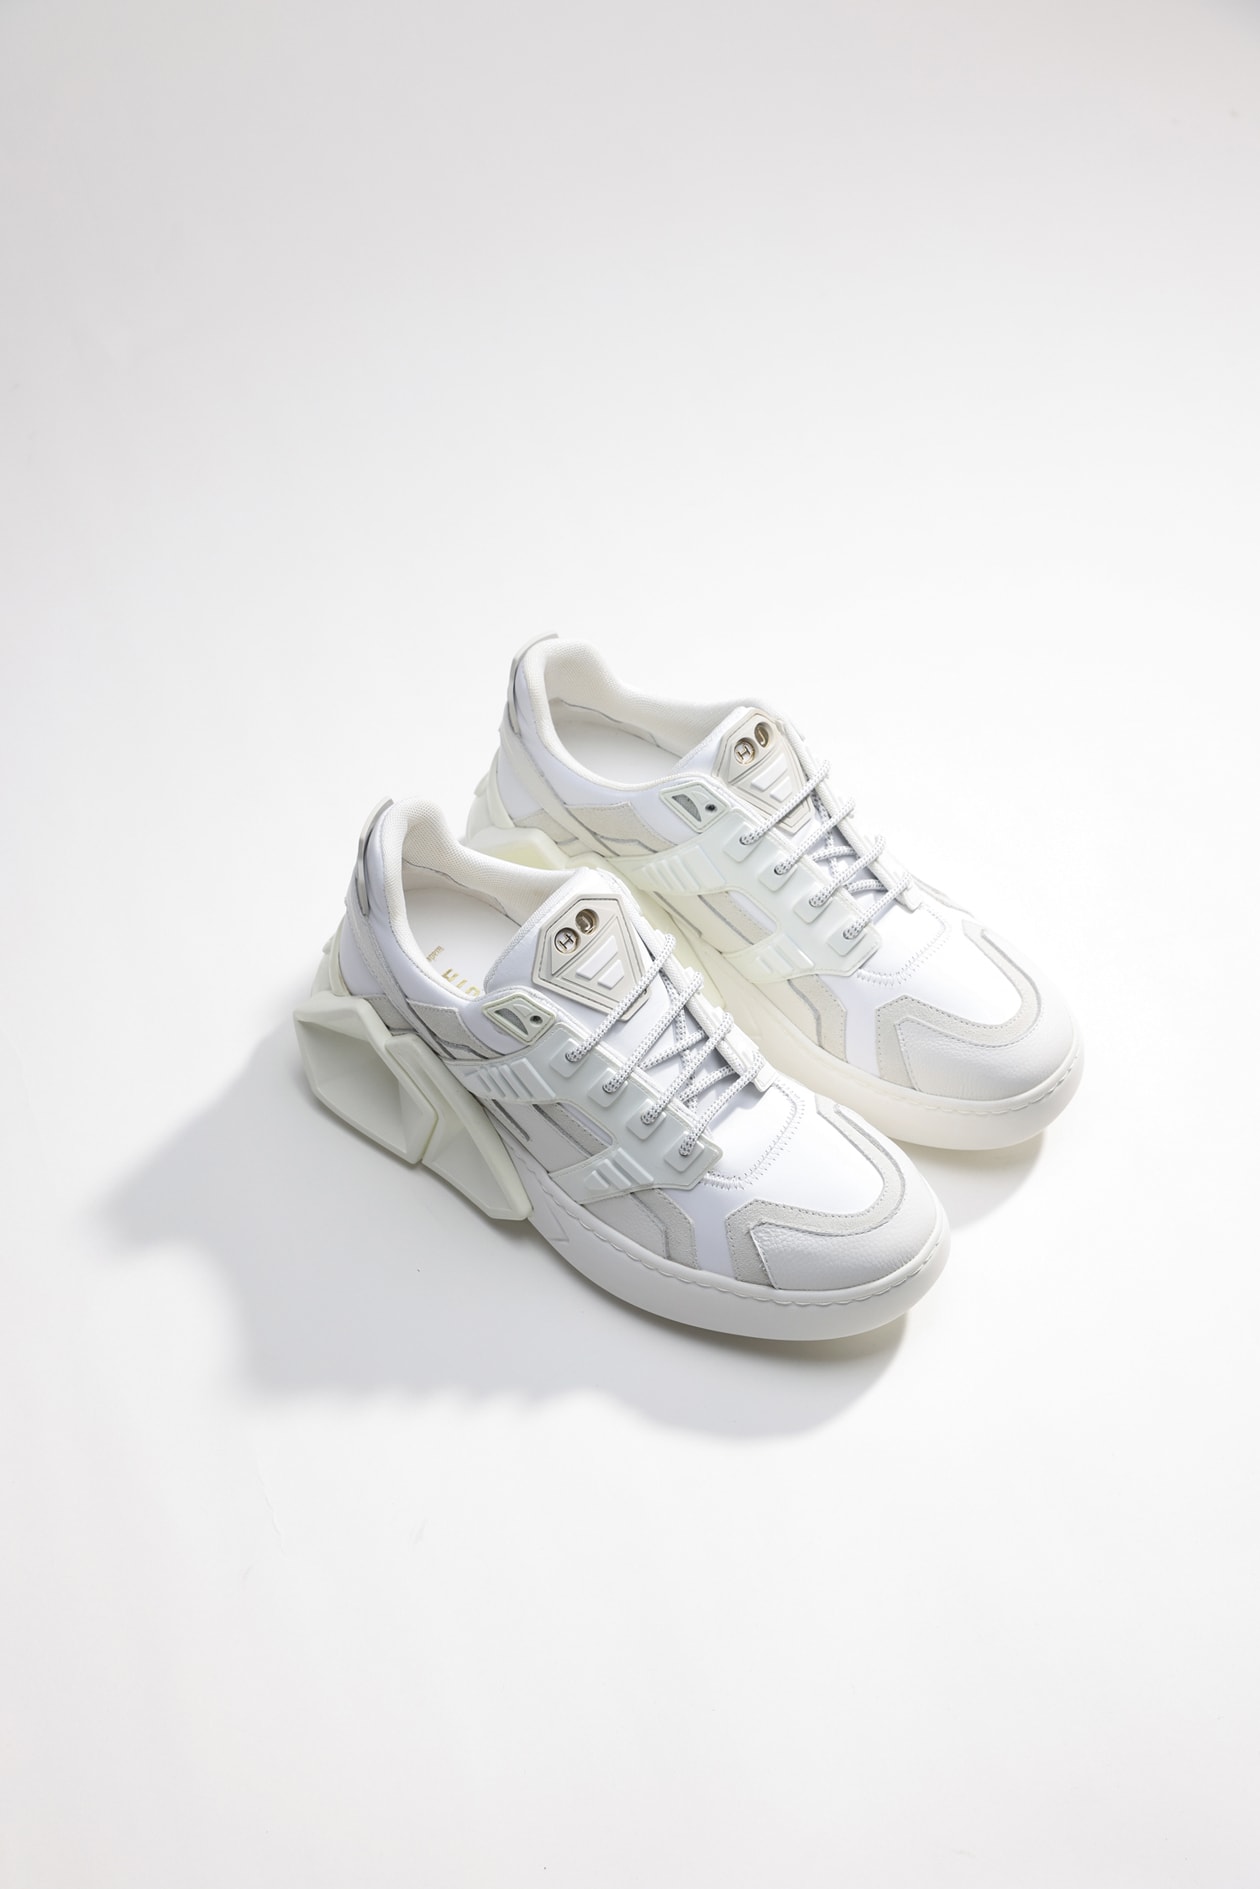 Hide&amp;jack High Top Trainer - Silverstone White